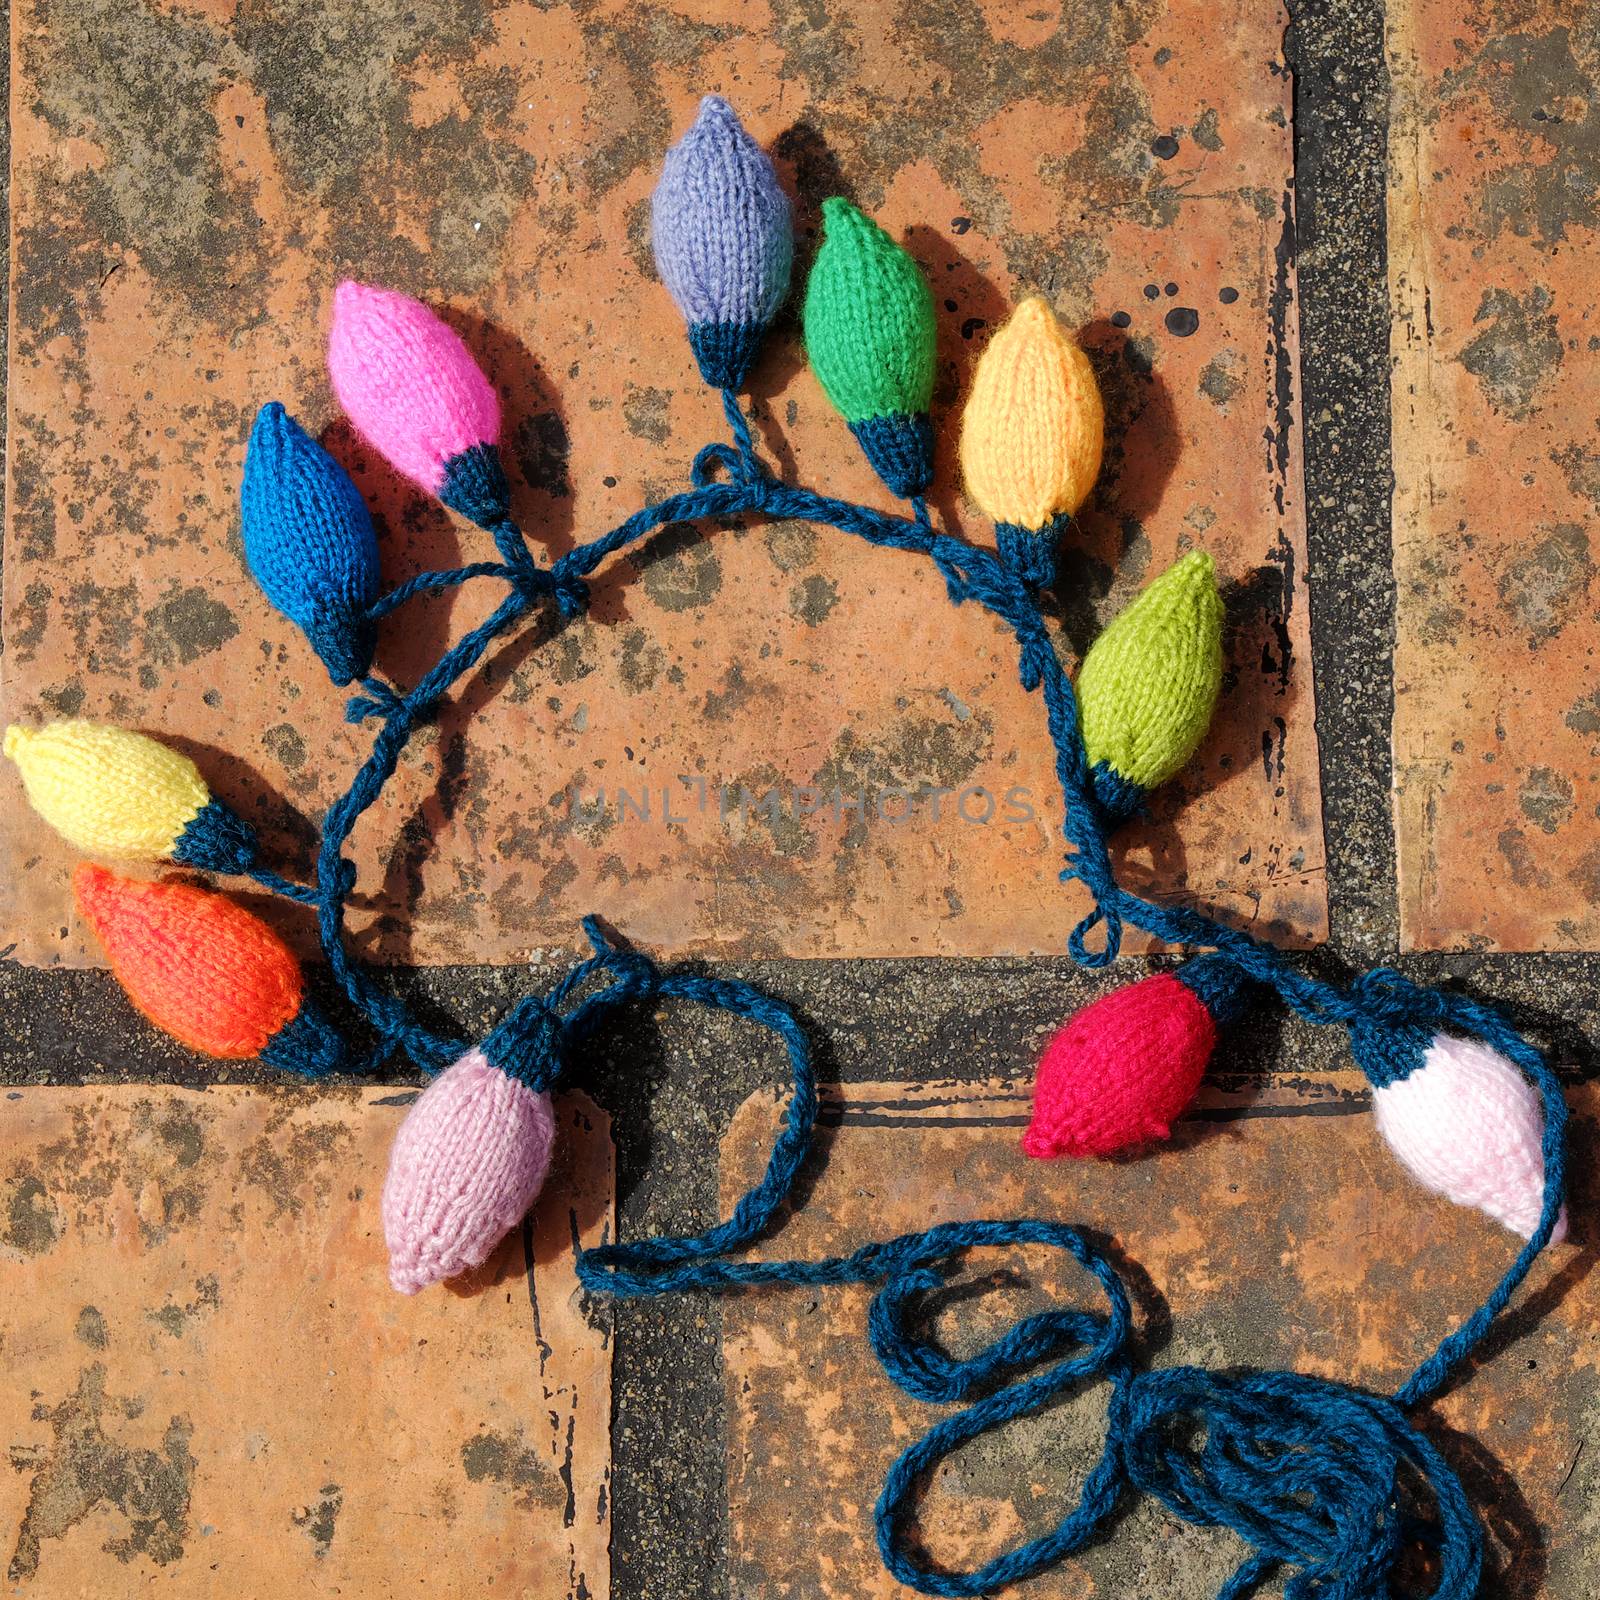 Group of colorful Xmas ornament for winter holiday, handmade product, knitted Christmas lights bulb on brick background